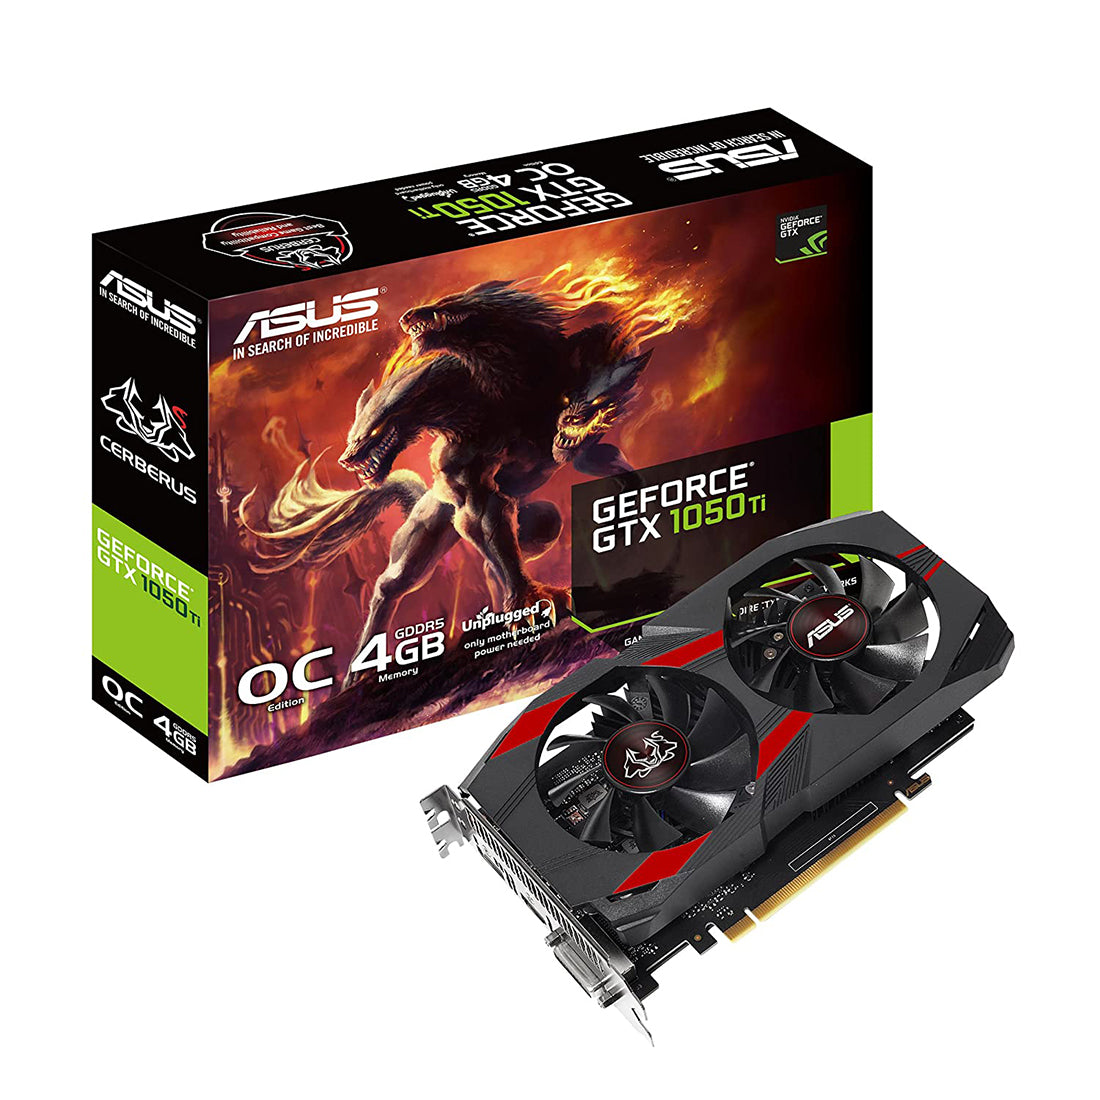 [RePacked] ASUS Cerberus GeForce GTX 1050 Ti 4GB GDDR5 128-Bit Graphics Card with IP5X Dust Resistance